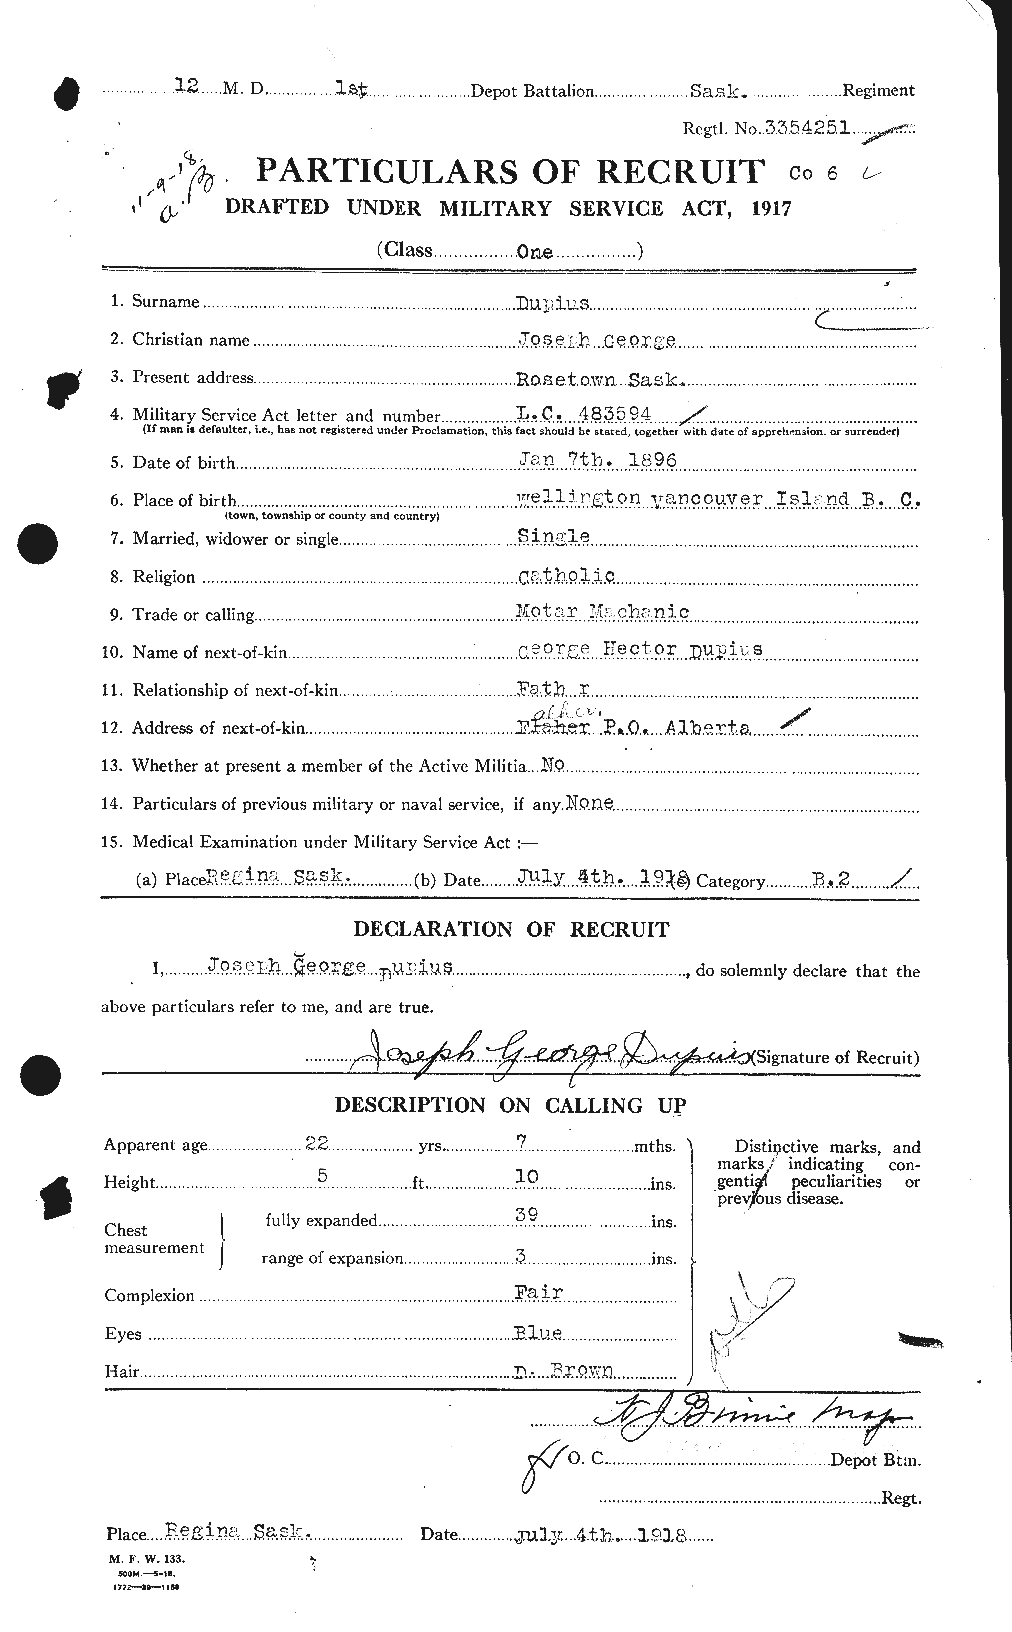 Personnel Records of the First World War - CEF 303279a